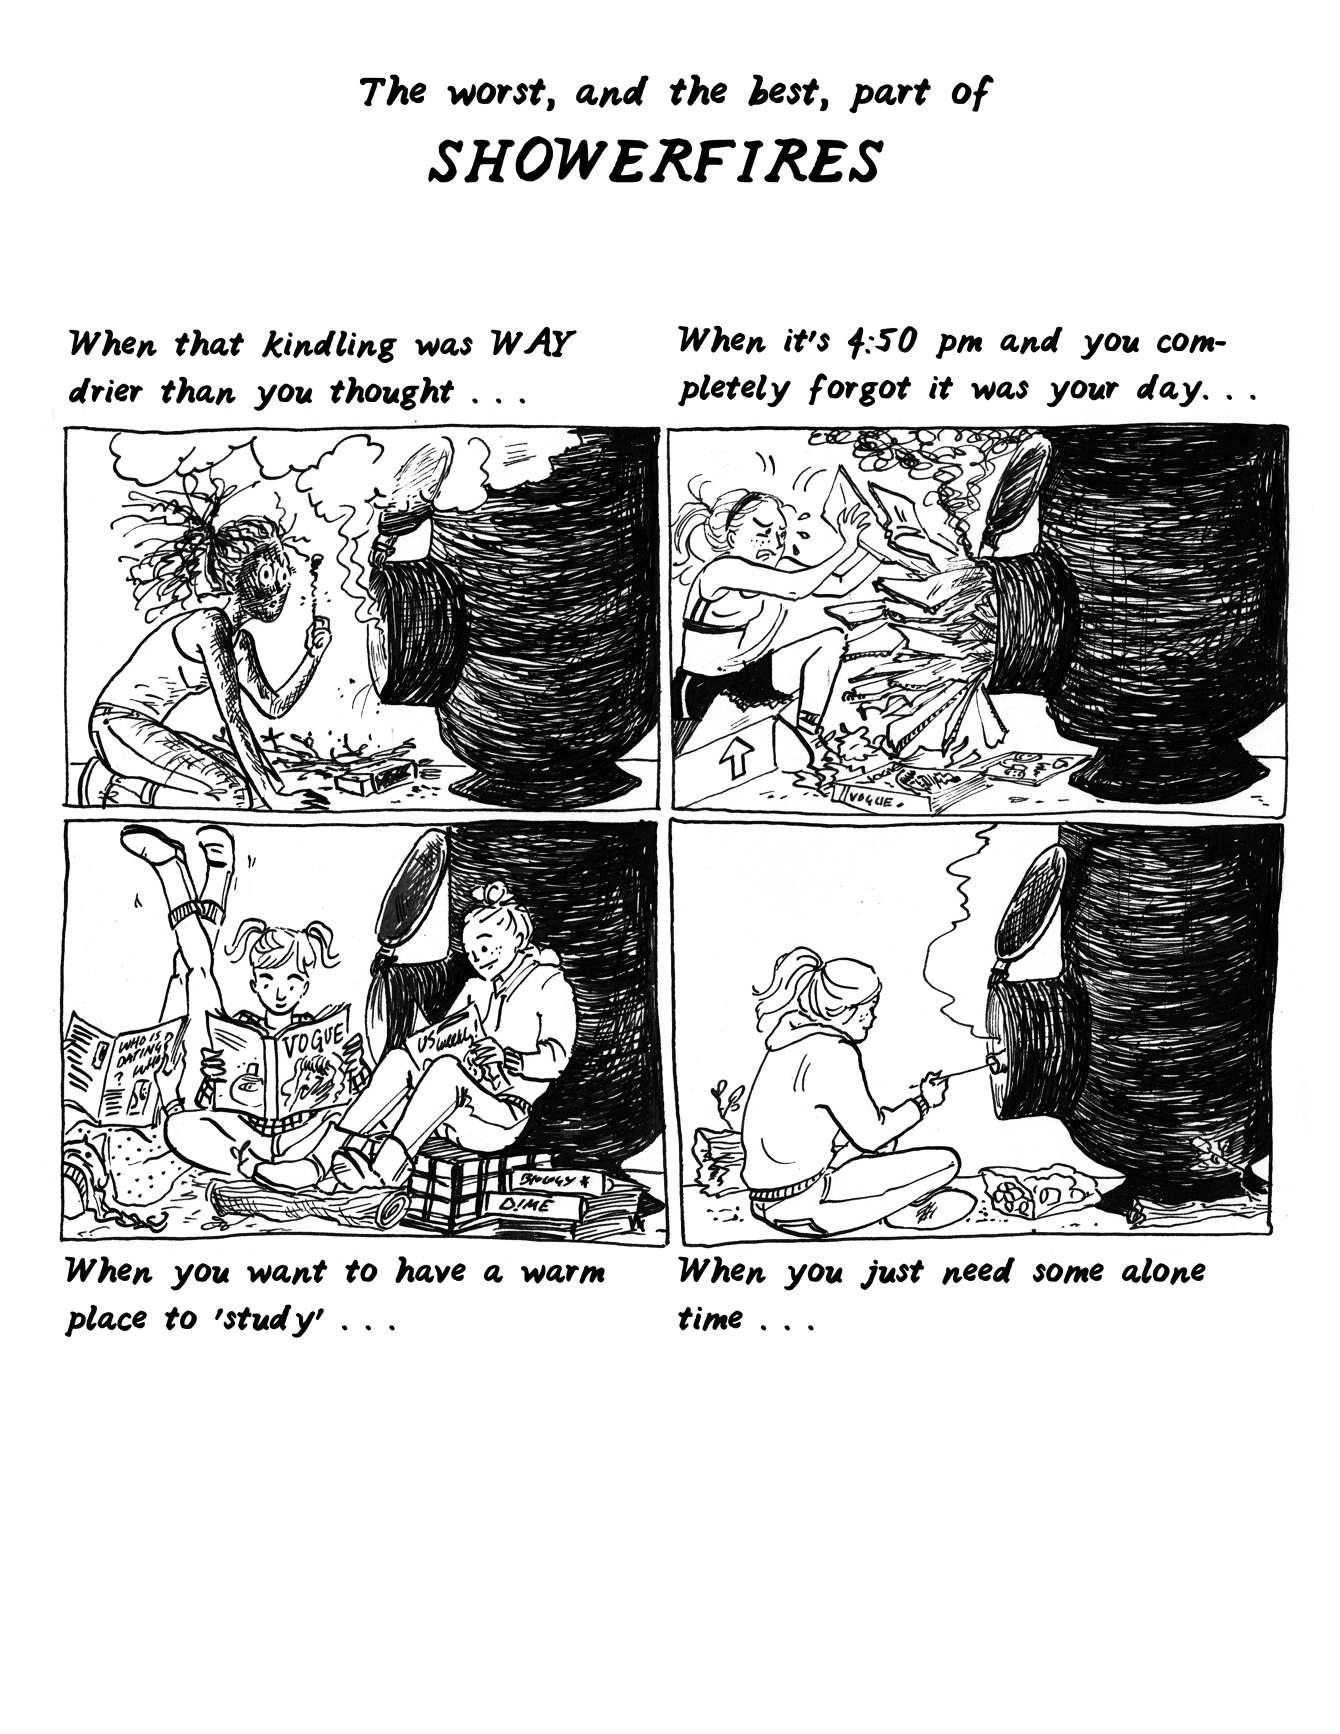 Showerfires comic by Emma Munger '08